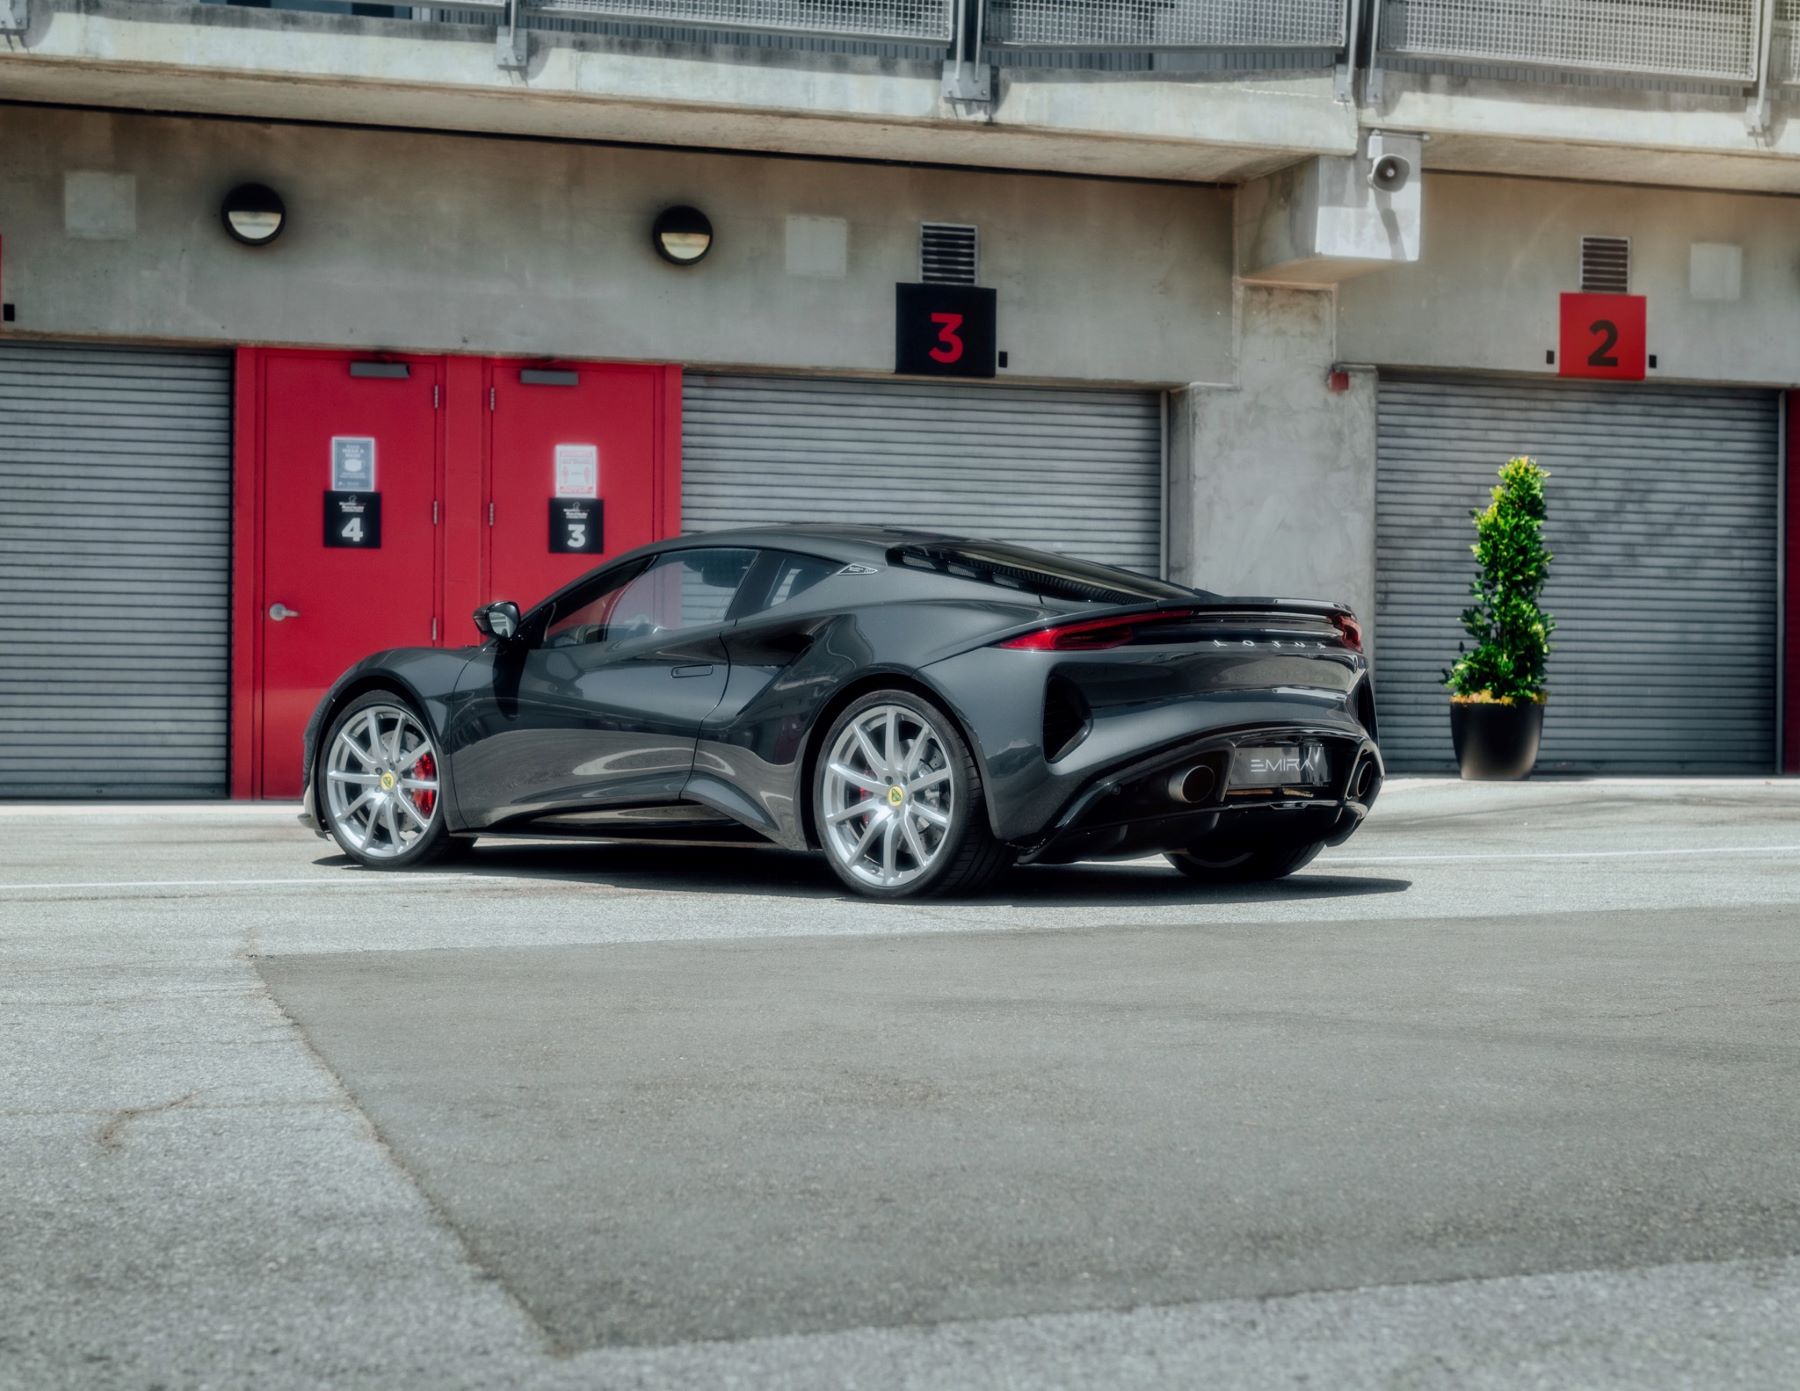 The Lotus Emira supercar parked in a strip of storage garages